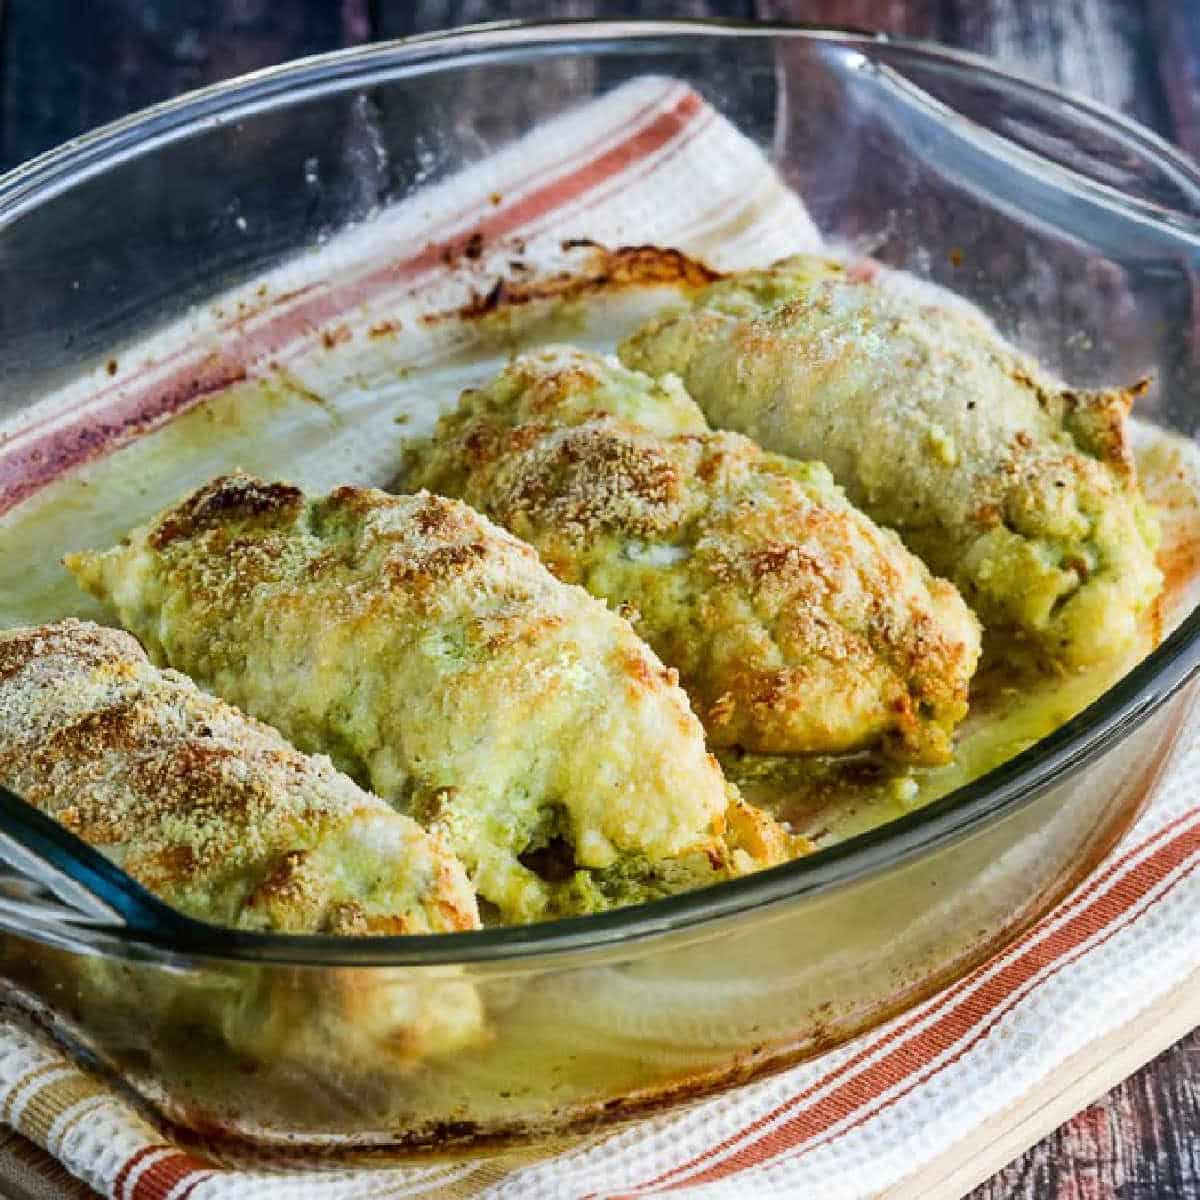 Baked Chicken Stuffed with Pesto and Cheese shown in baking dish on towel.